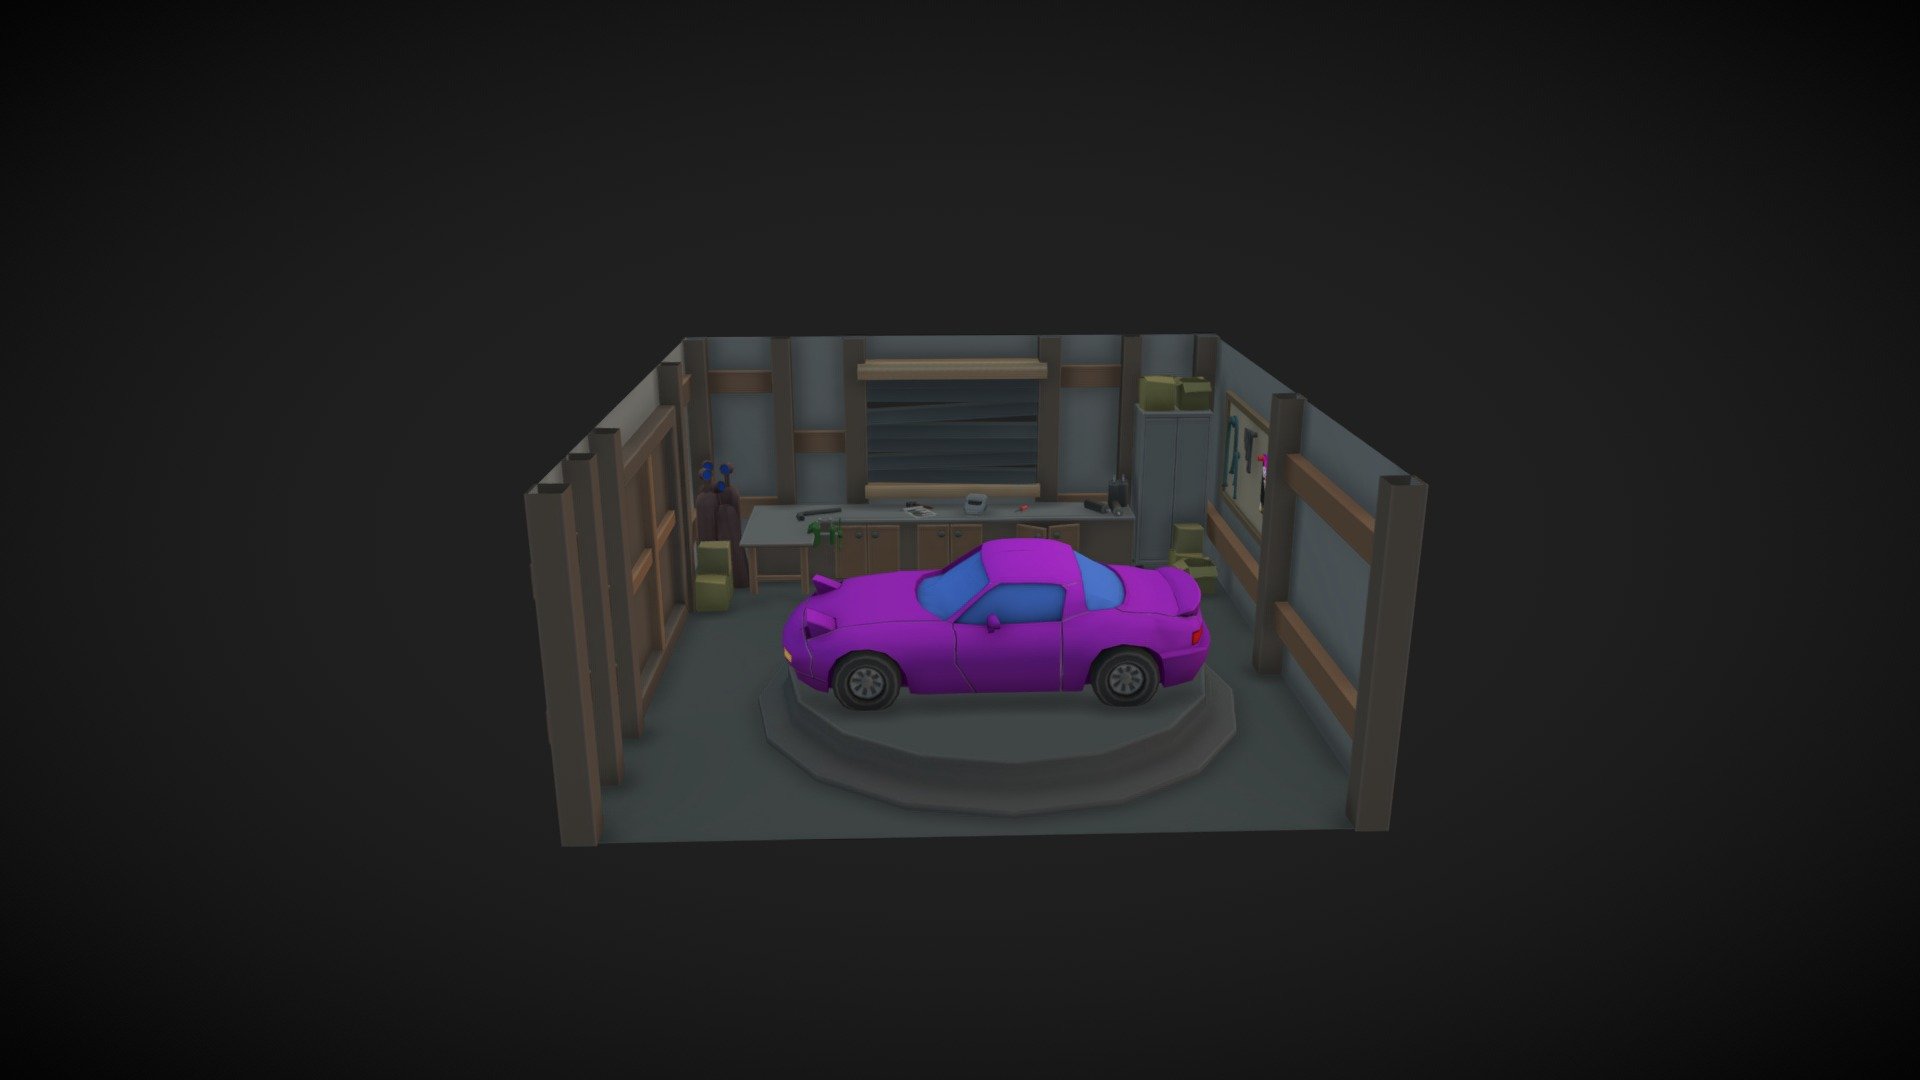 Low poly garage with miata
Just a quick model that I made for a game that I am working on!
Hope you like the model!

Thanks! - Low poly garage with miata inside - 3D model by Retry Games (@retrygames) 3d model